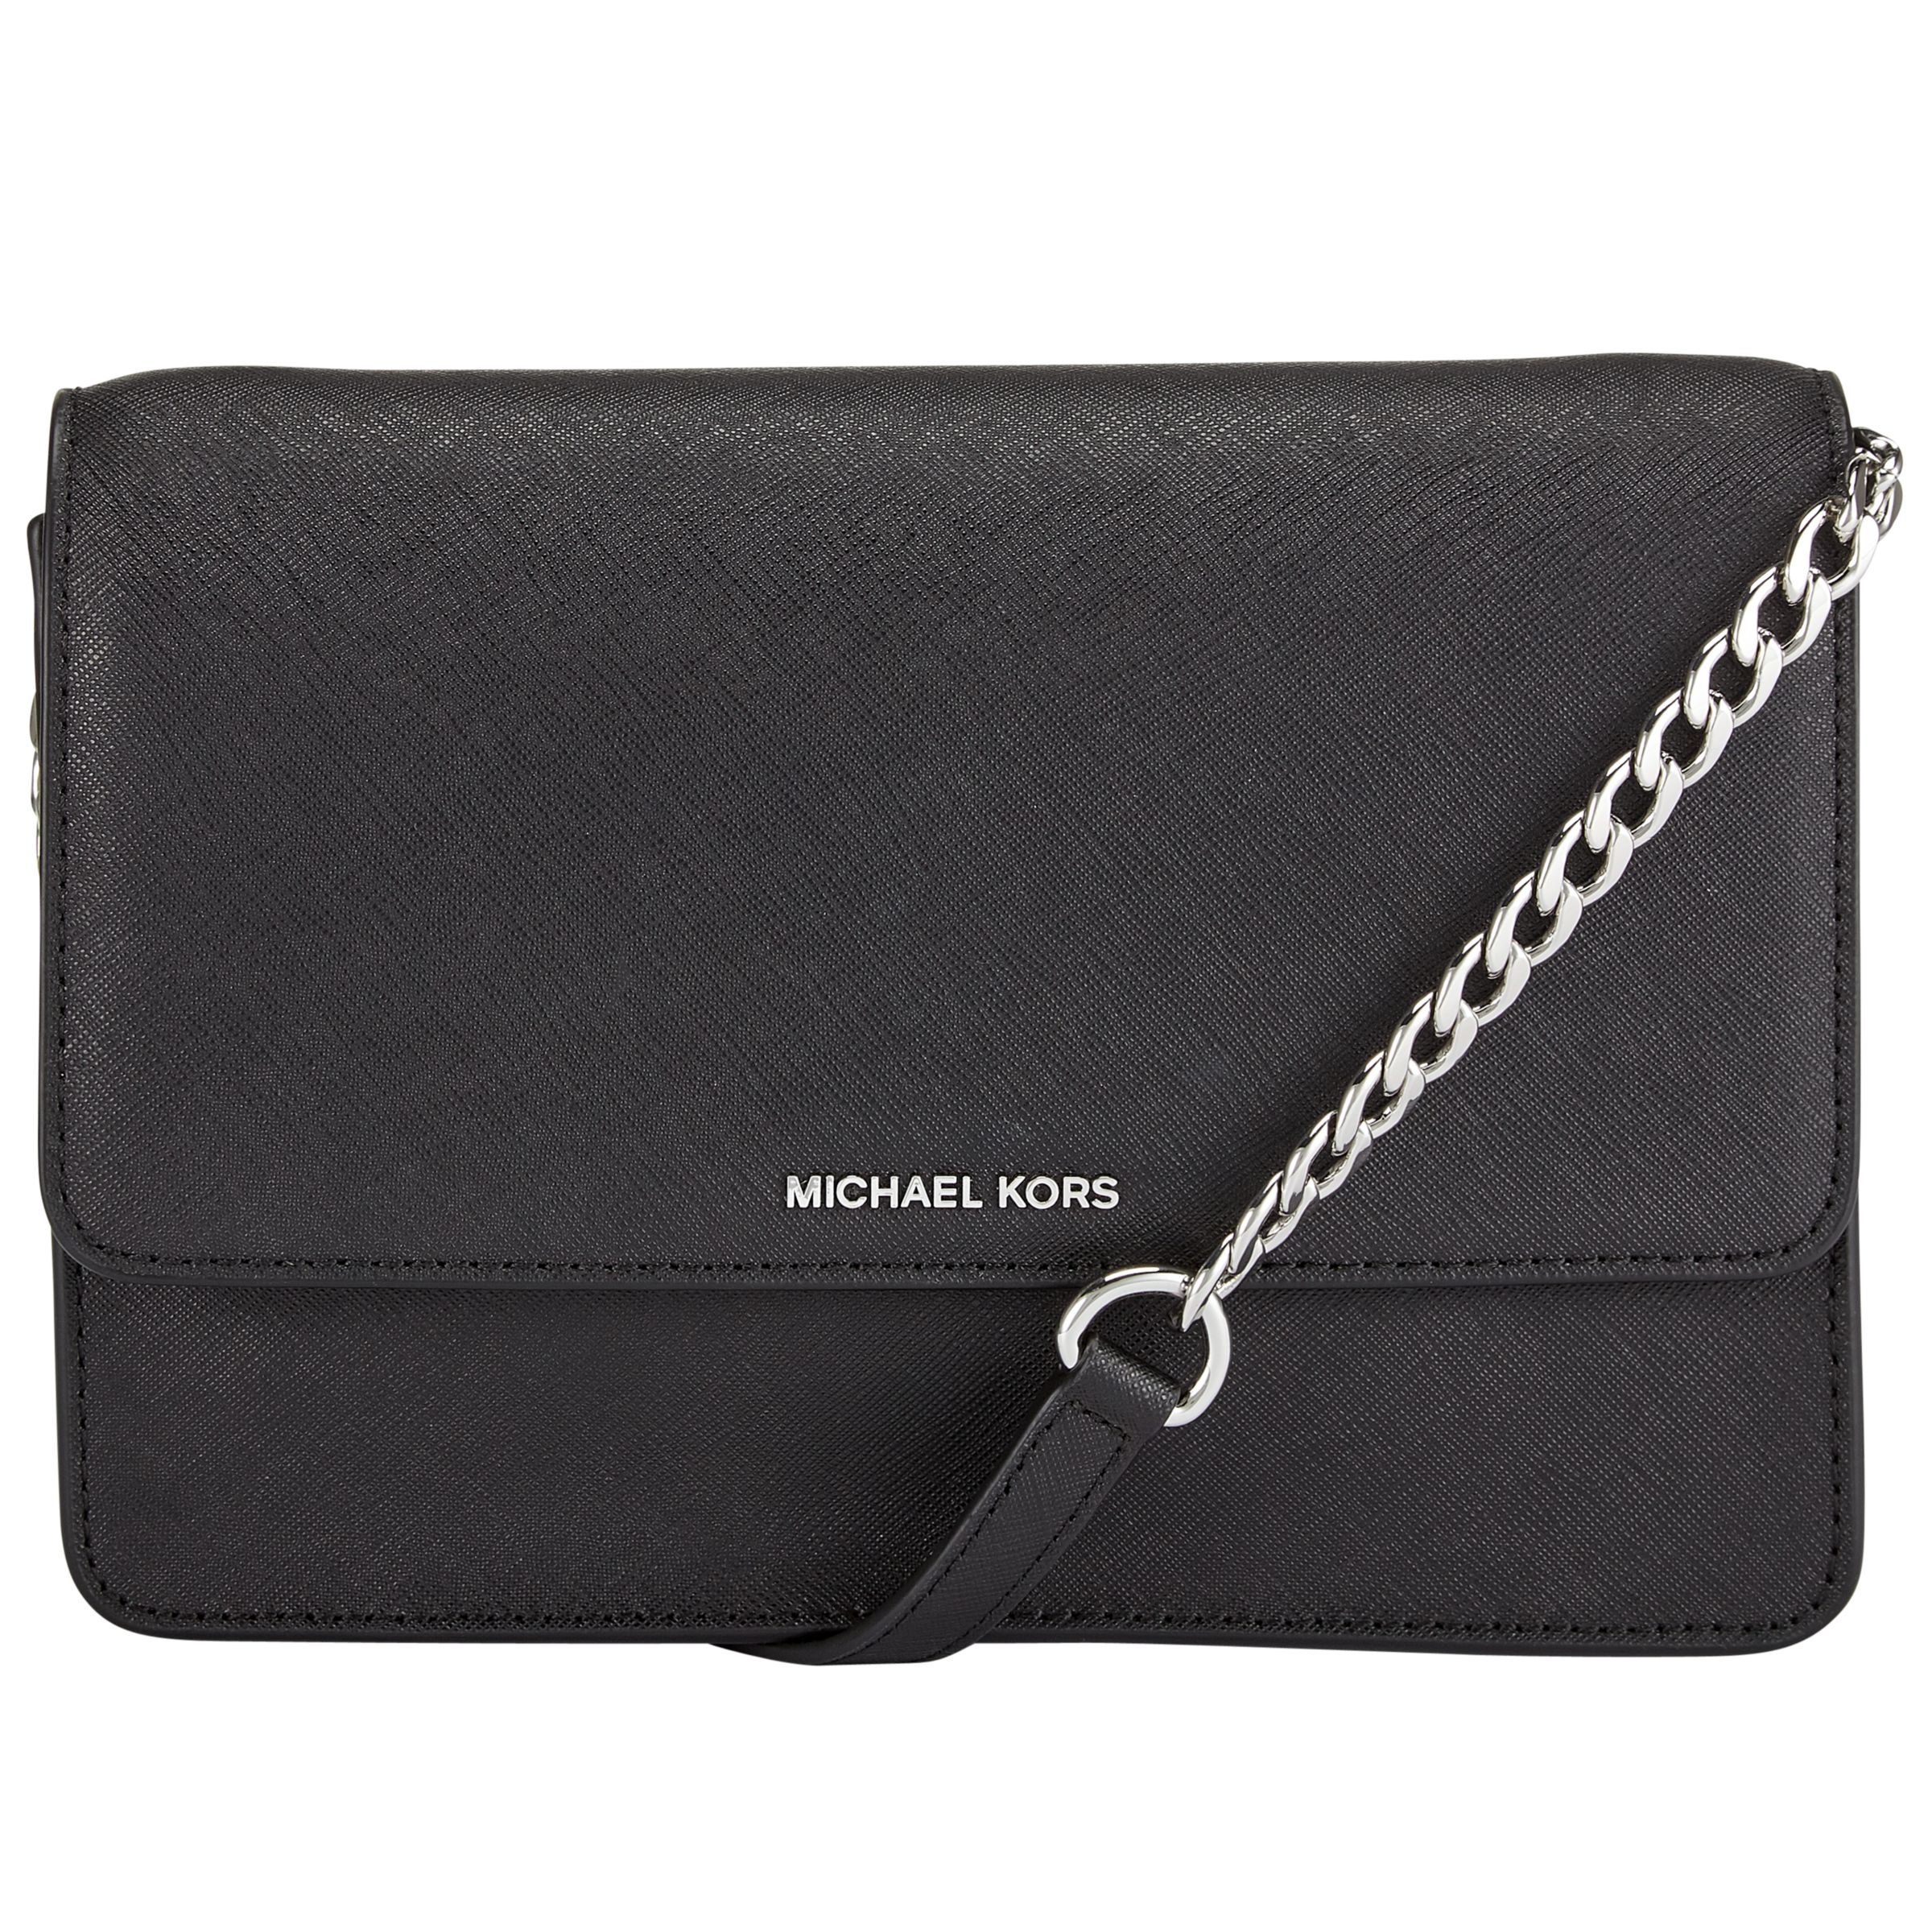 MICHAEL Michael Kors Black Leather and Patent Leather Daniela Crossbody Bag MICHAEL  Michael Kors